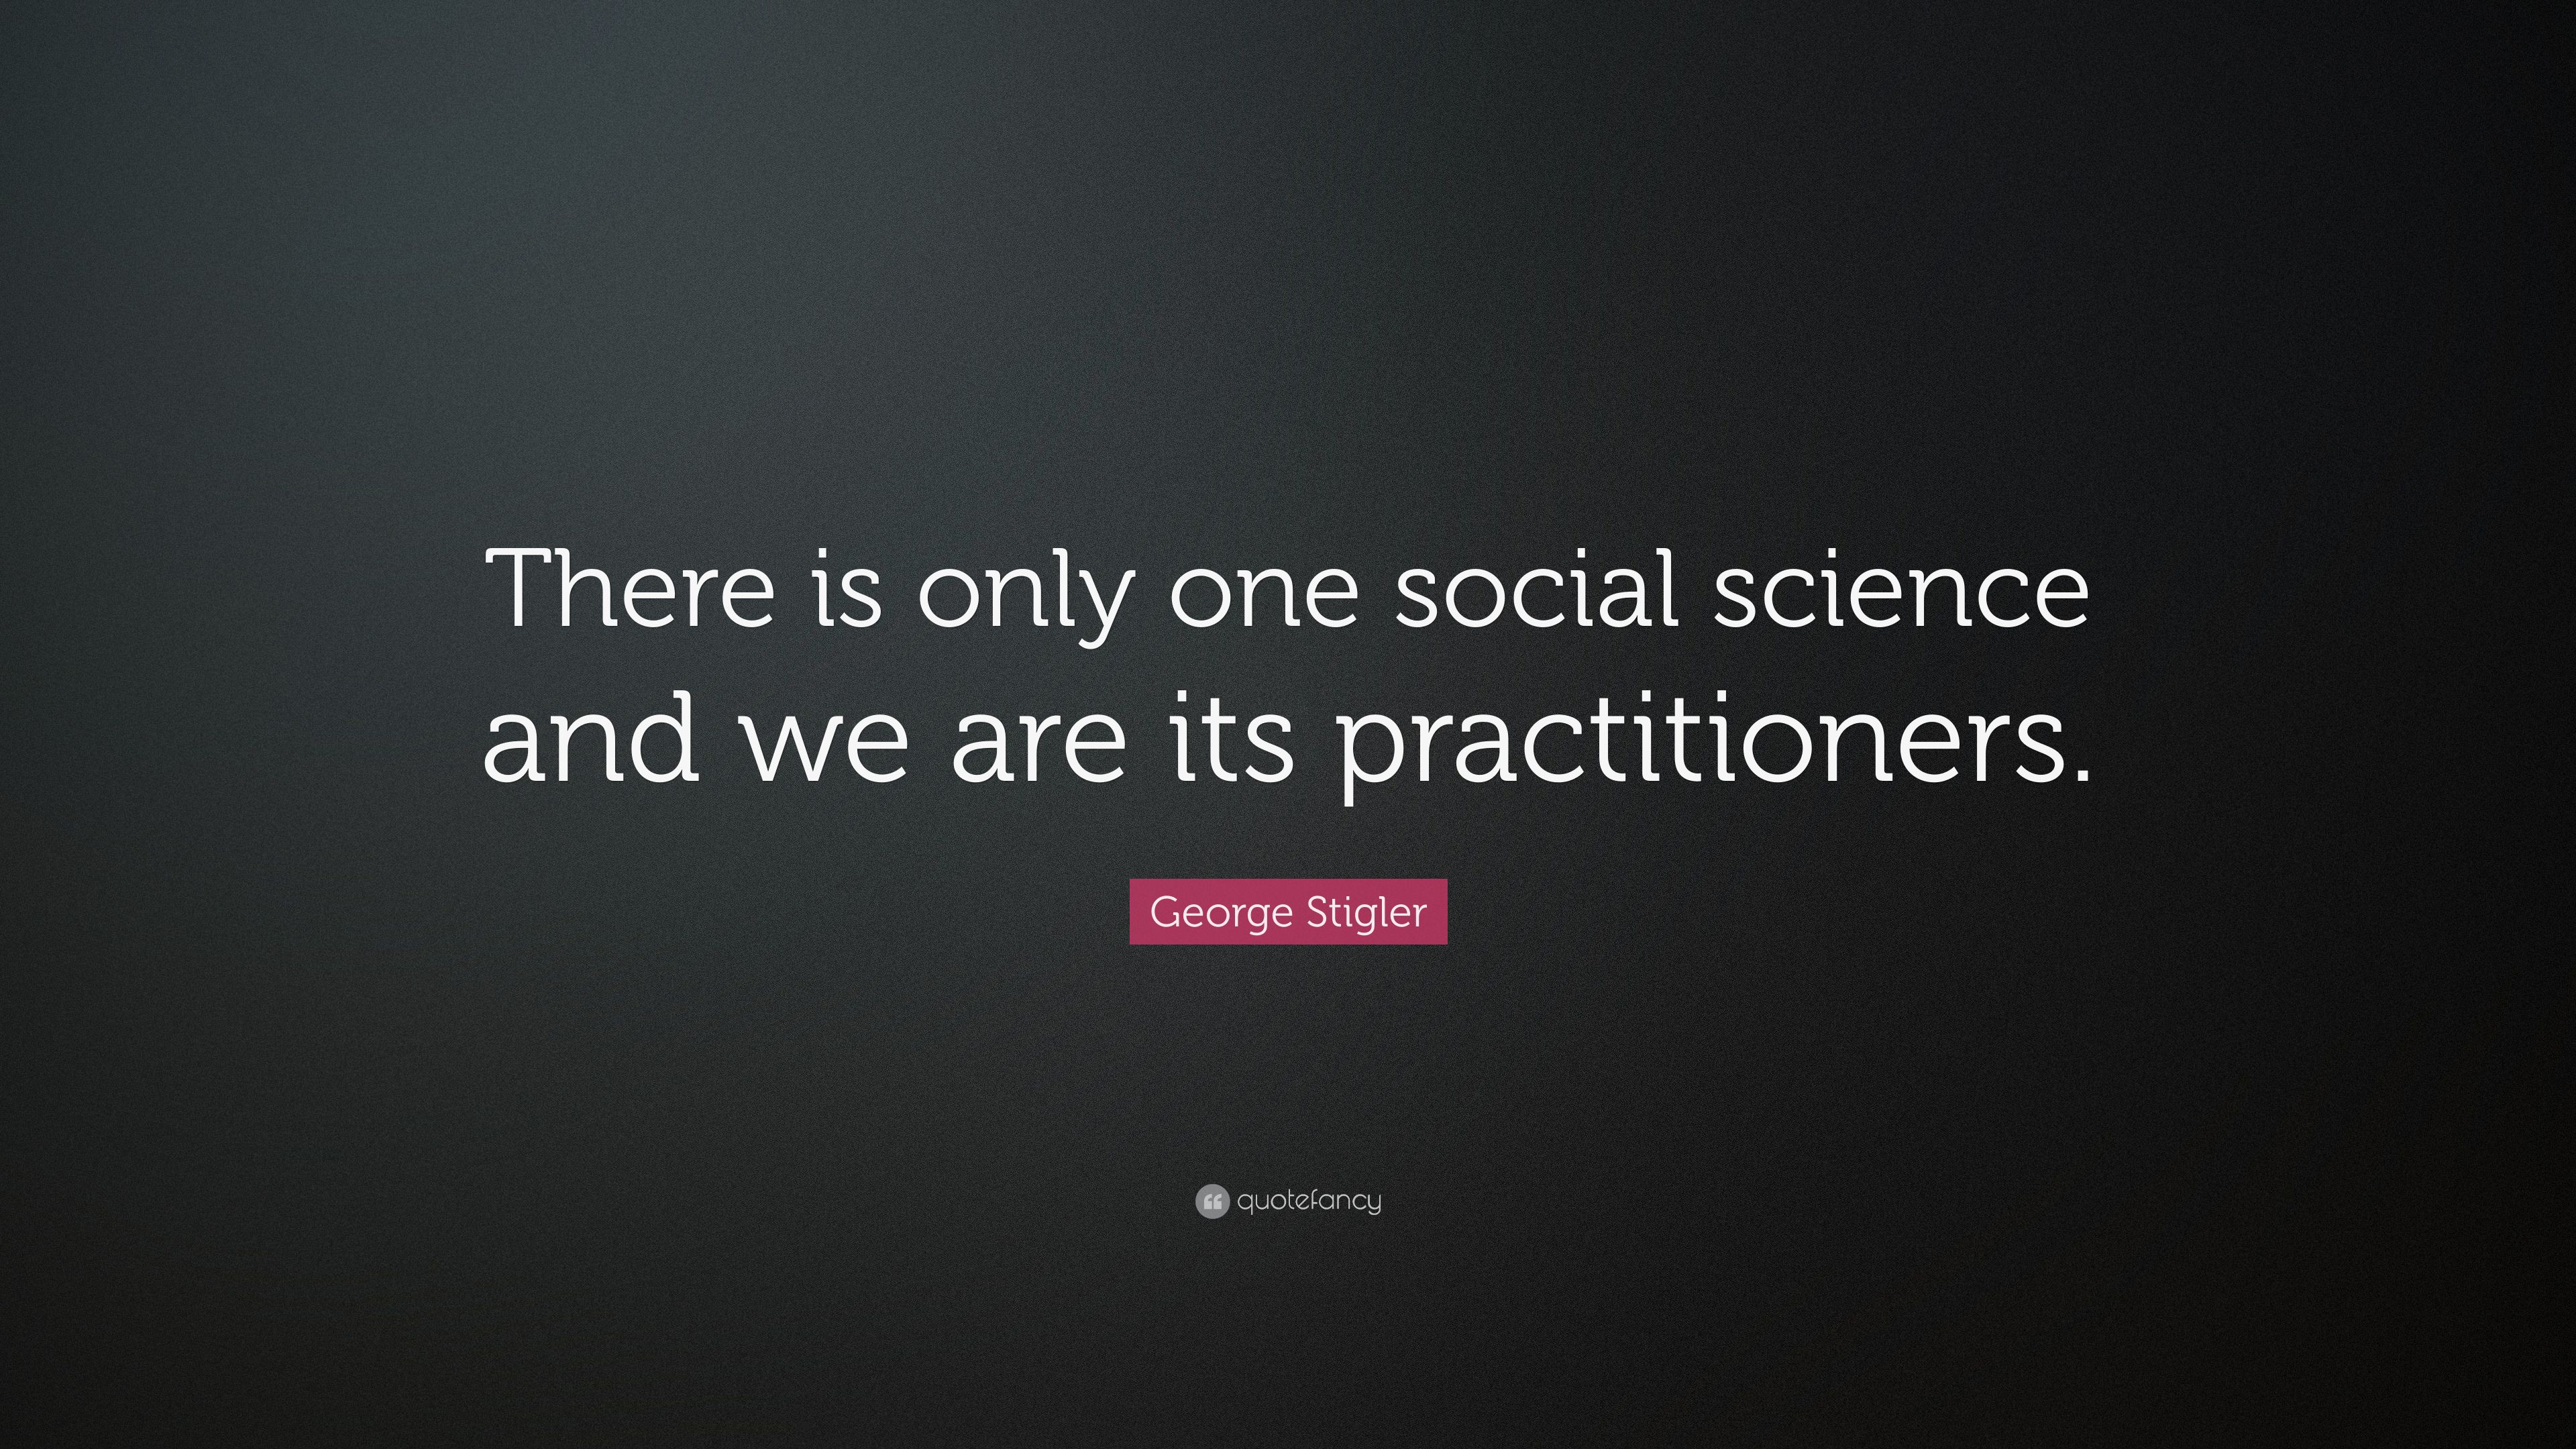 George Stigler Quote: “There is only .quotefancy.com